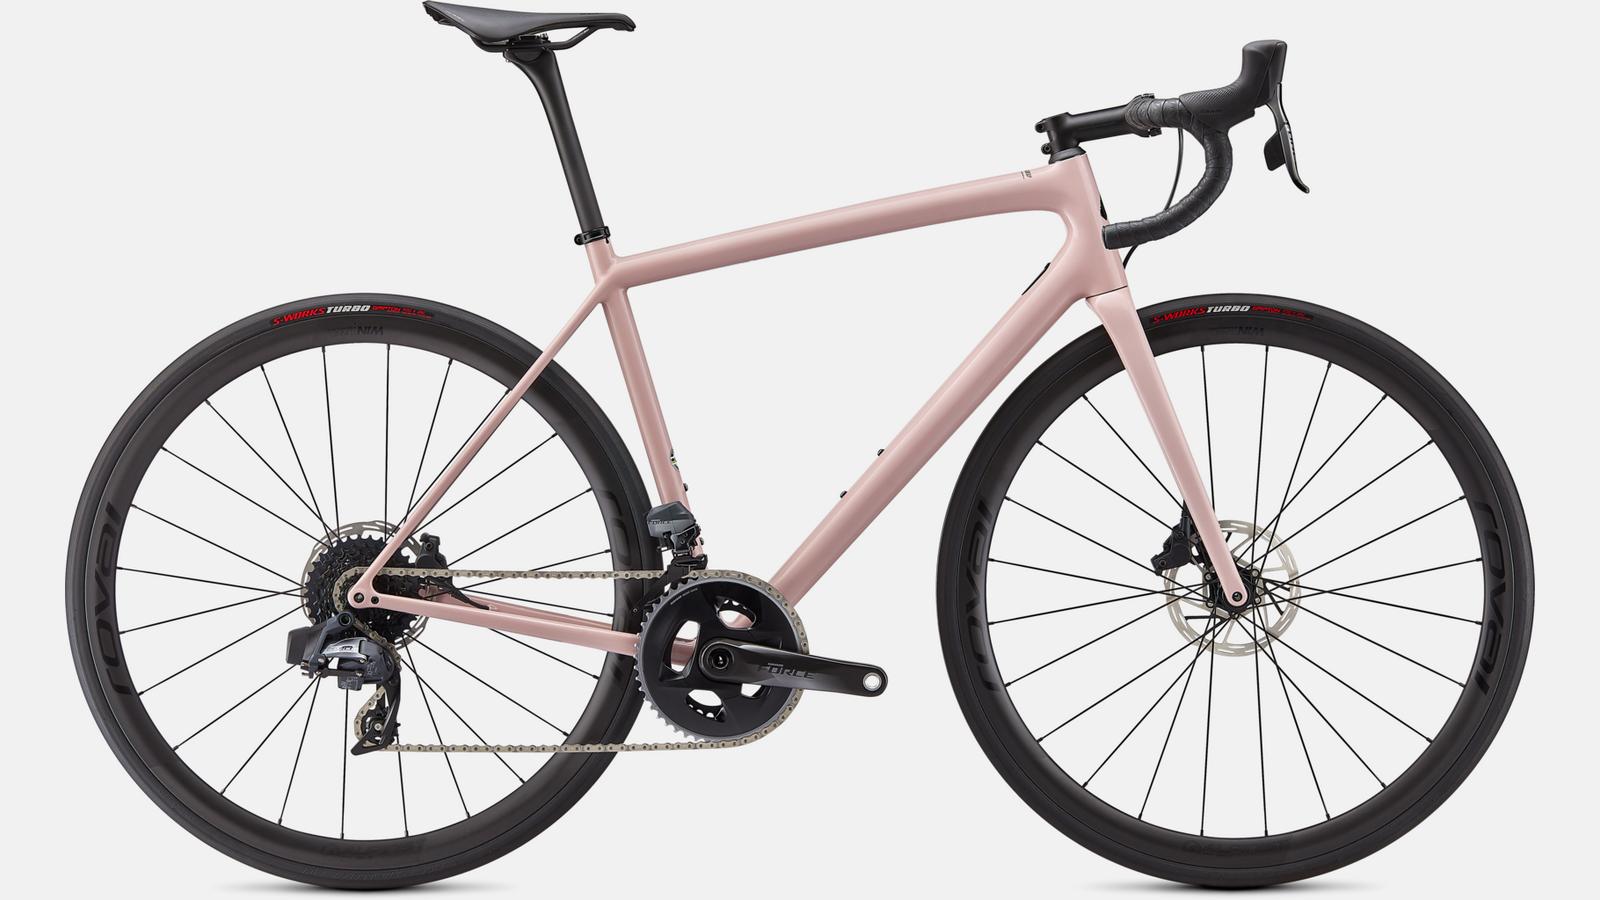 Paint for 2021 Specialized Aethos Pro - SRAM Force eTap AXS - Gloss Blush